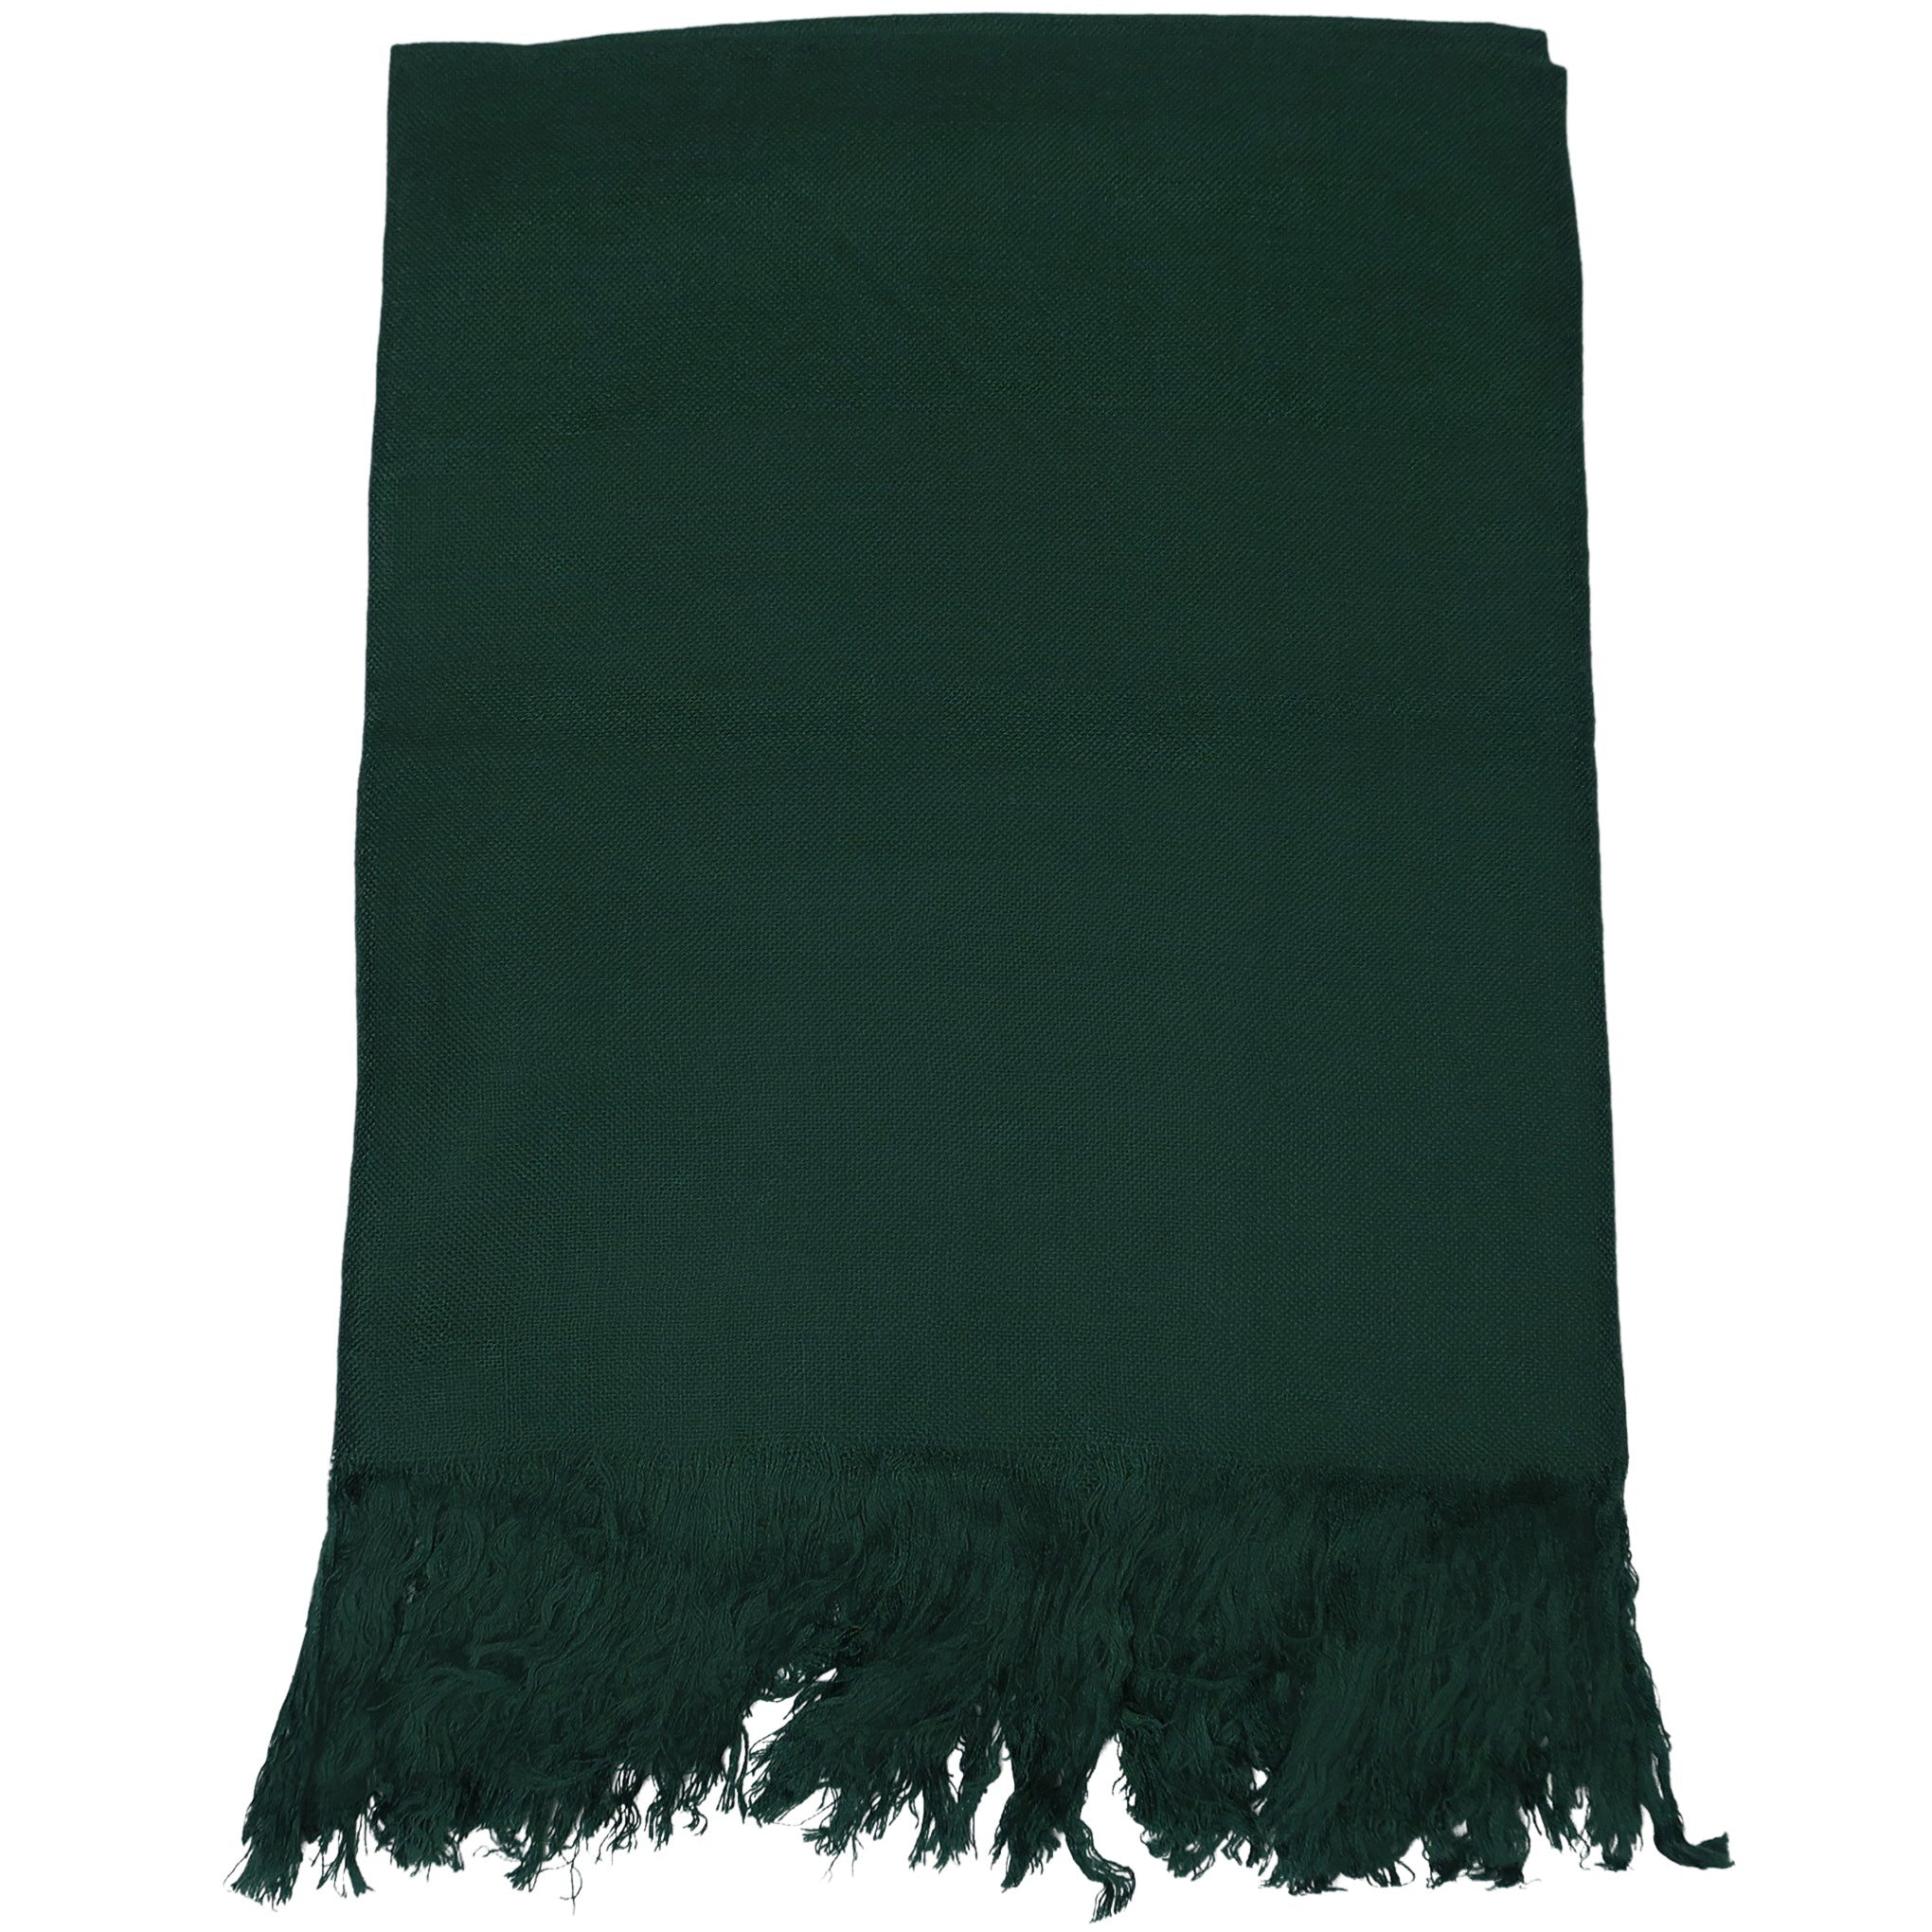 Blue Pacific Tissue Solid Modal and Cashmere Scarf Shawl in Pine Green